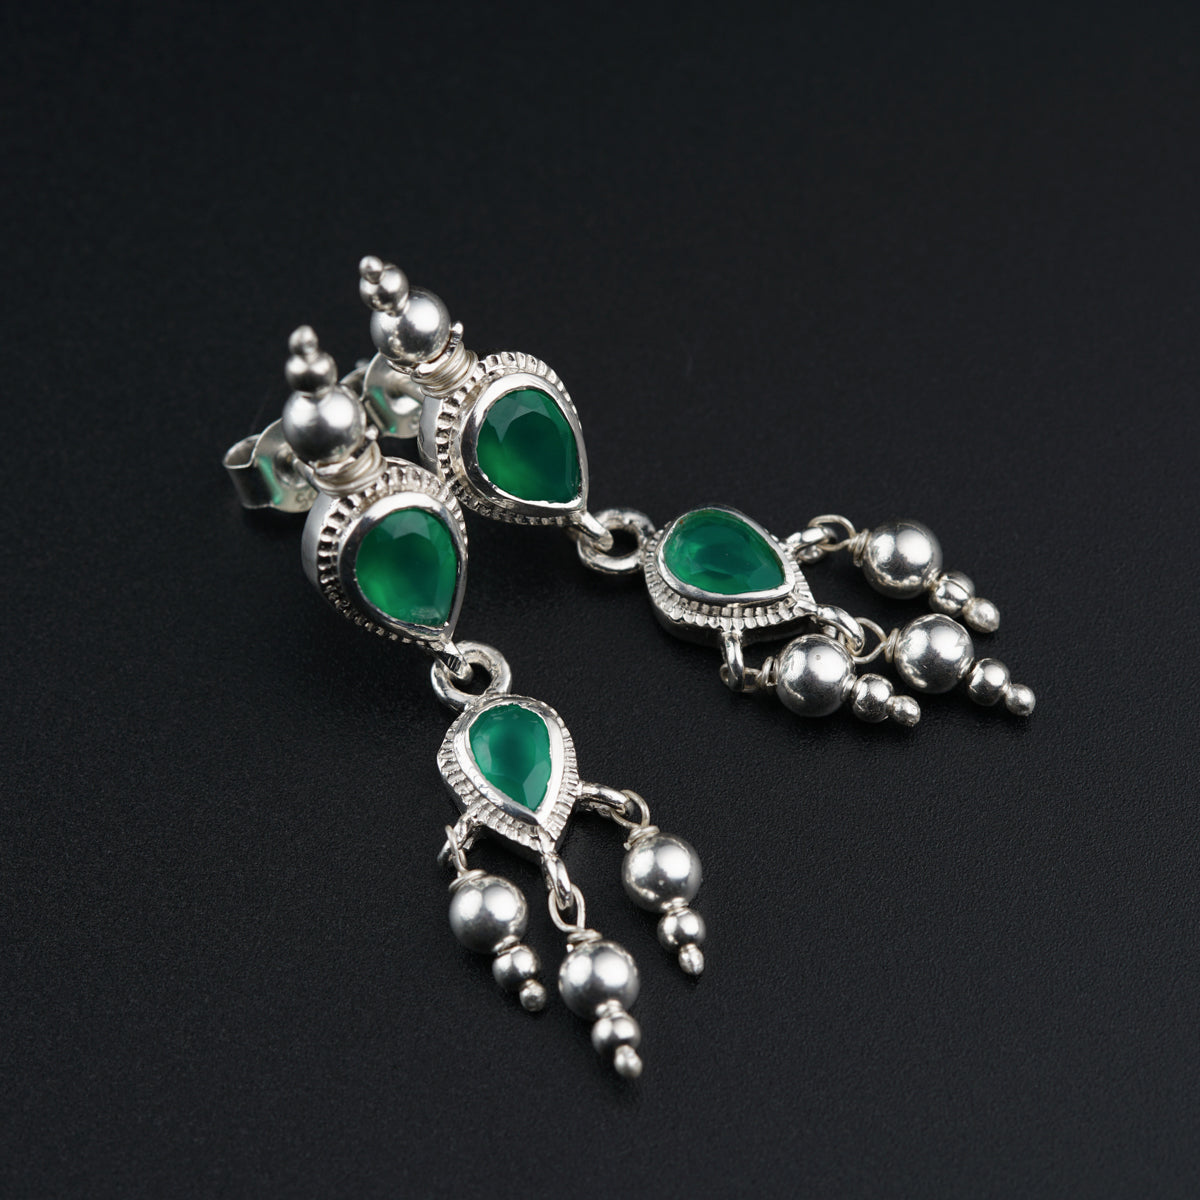 a pair of green and silver earrings on a black surface